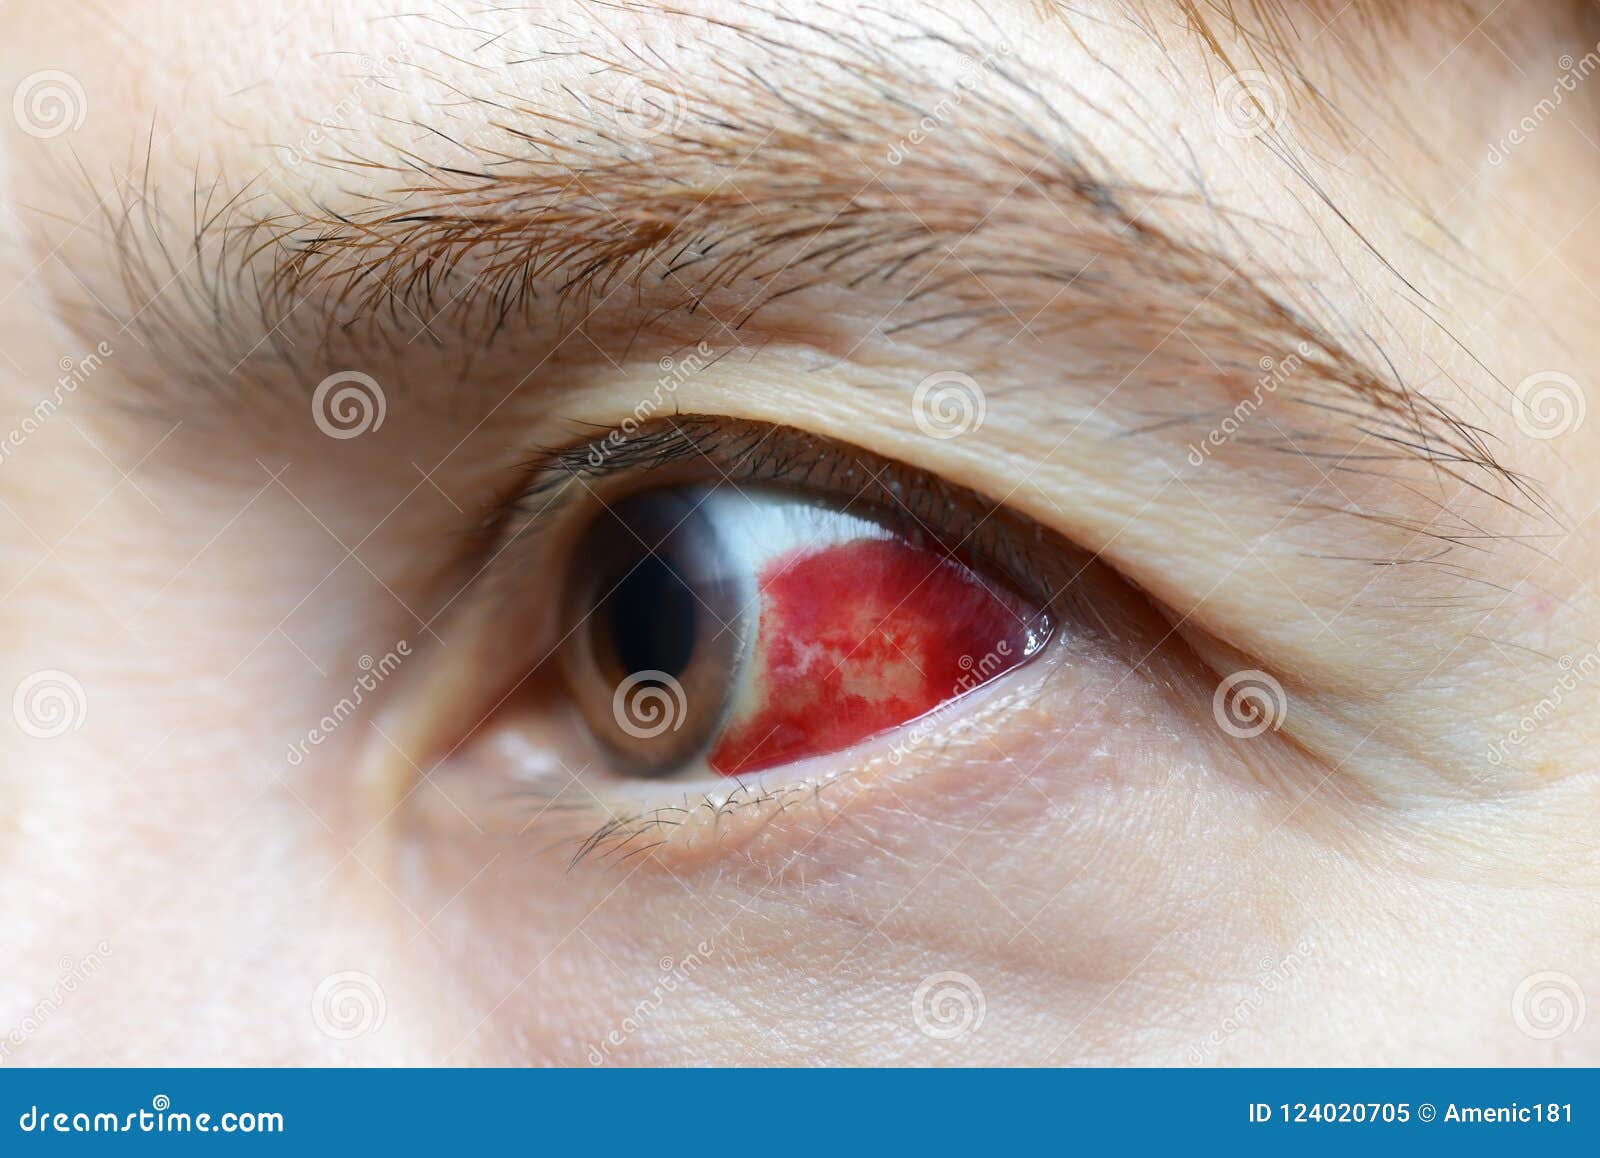 Woman With Burst Blood Vessel In Eye Stock Image Image Of Face